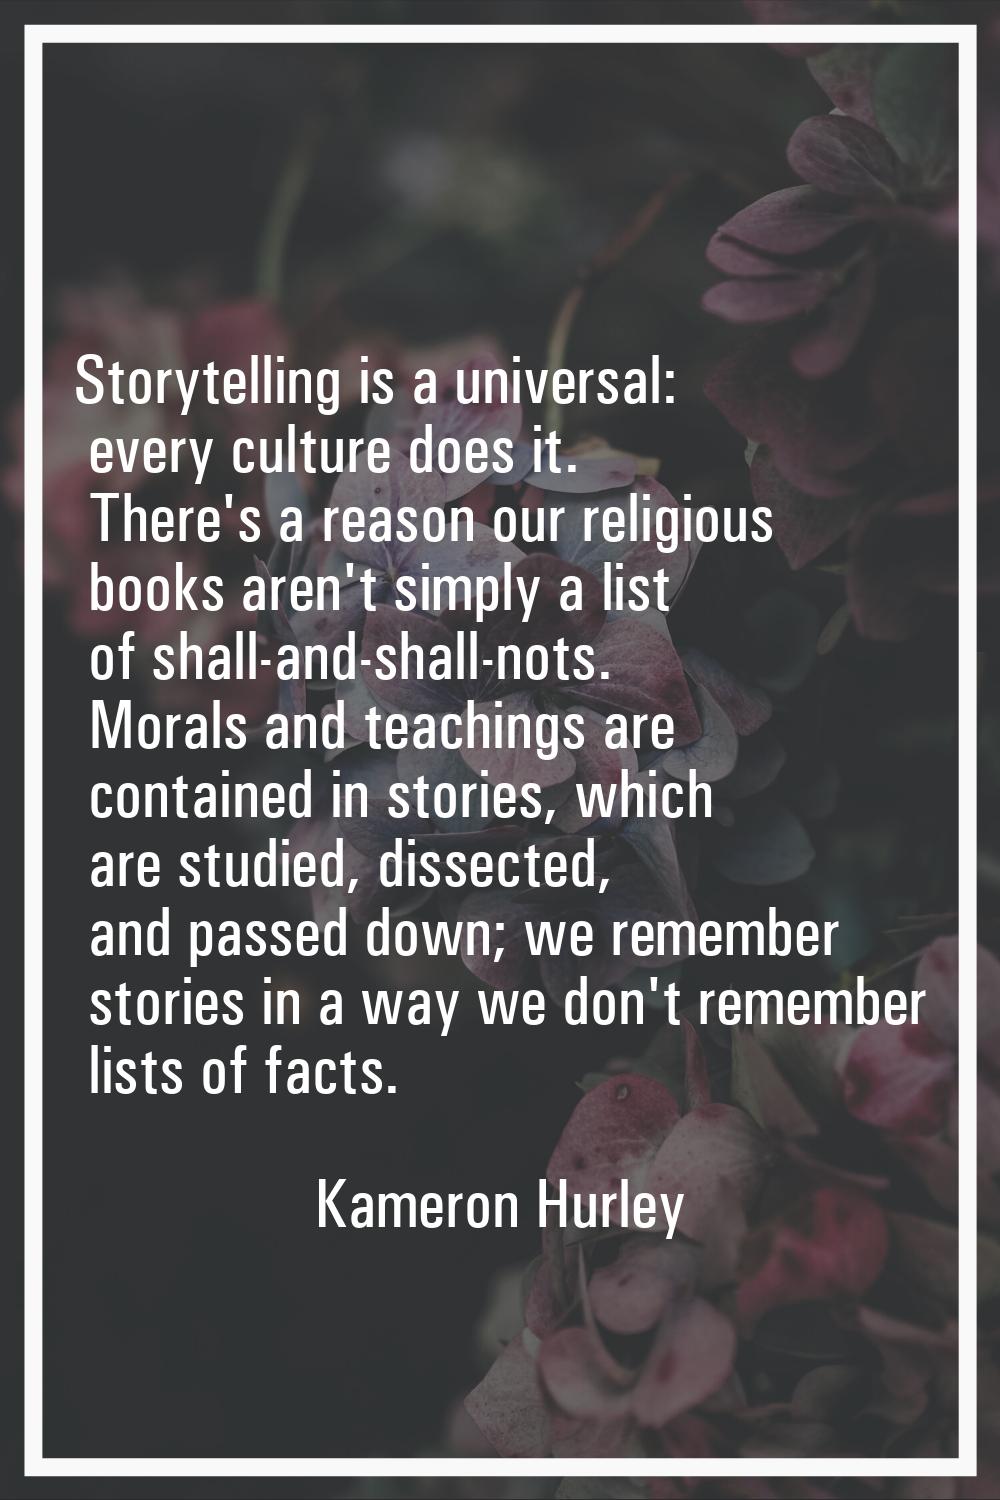 Storytelling is a universal: every culture does it. There's a reason our religious books aren't sim